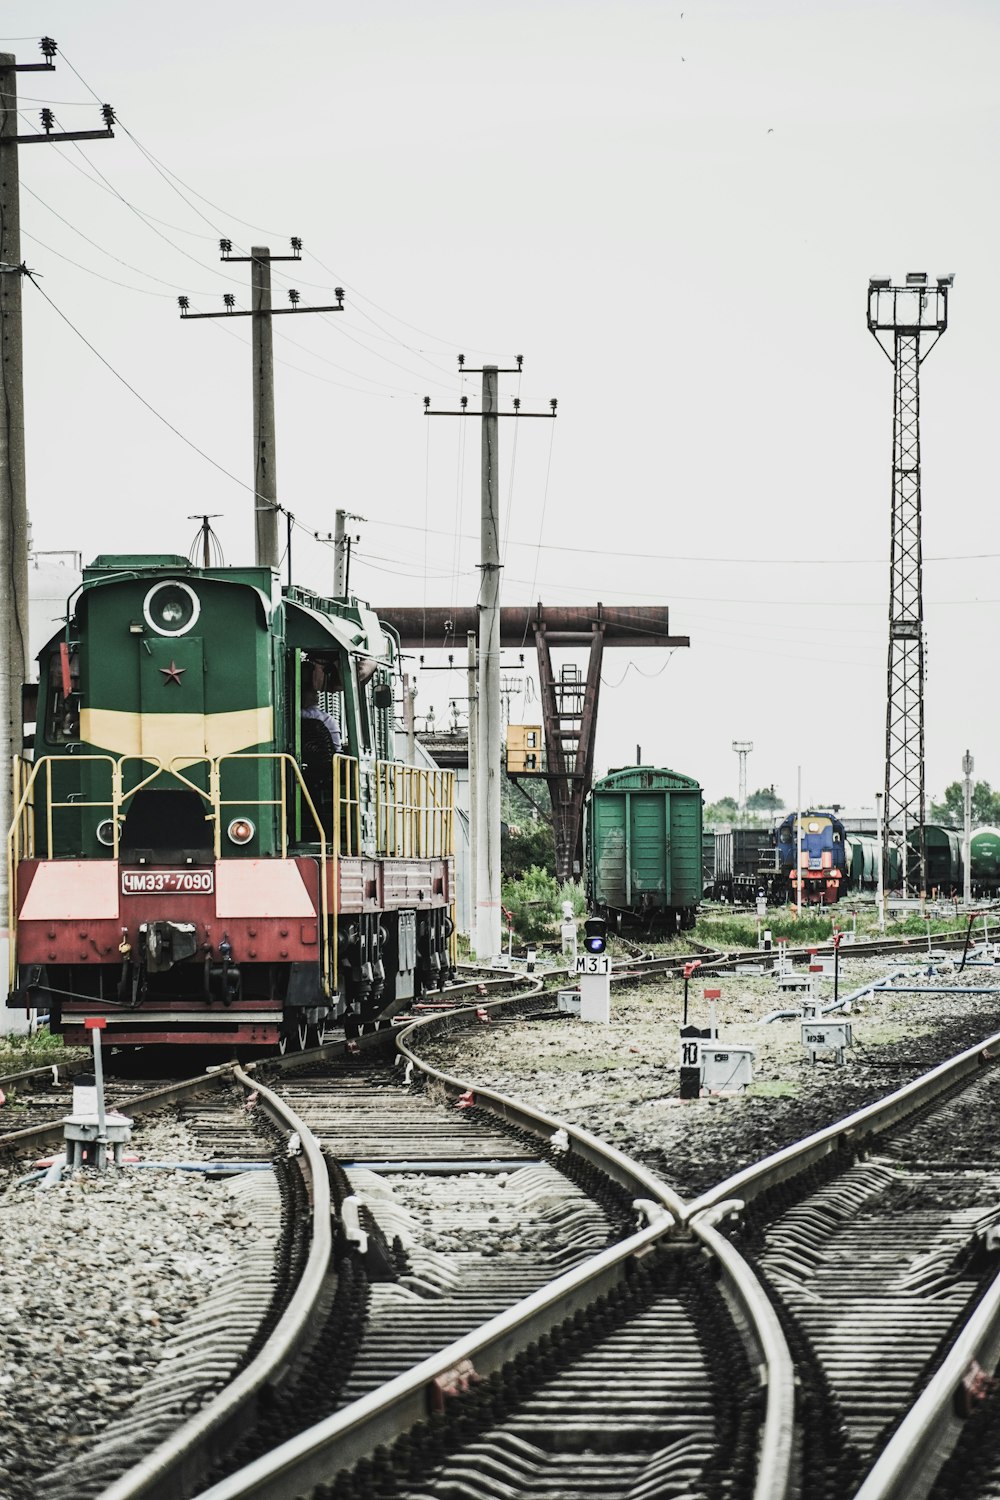 green and yellow train on rail tracks during daytime